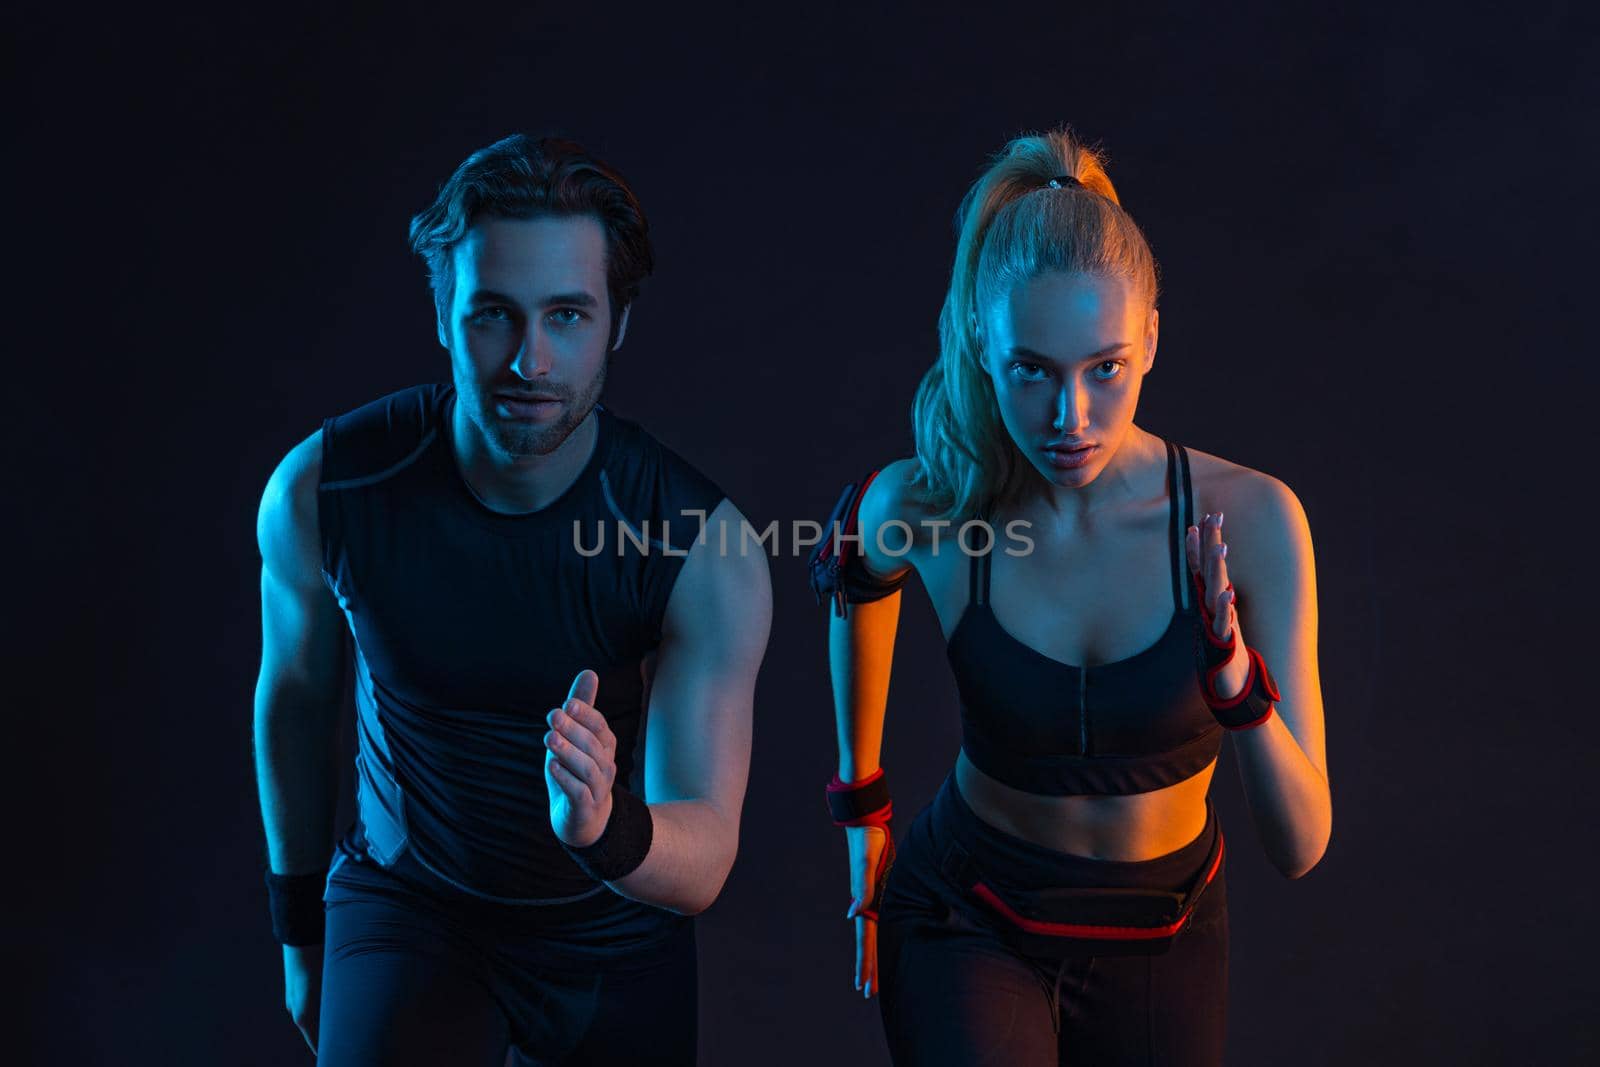 Sprinter run. Strong athletic woman and man running on black background wearing in the sportswear. Fitness and sport motivation. Runner concept. by MikeOrlov